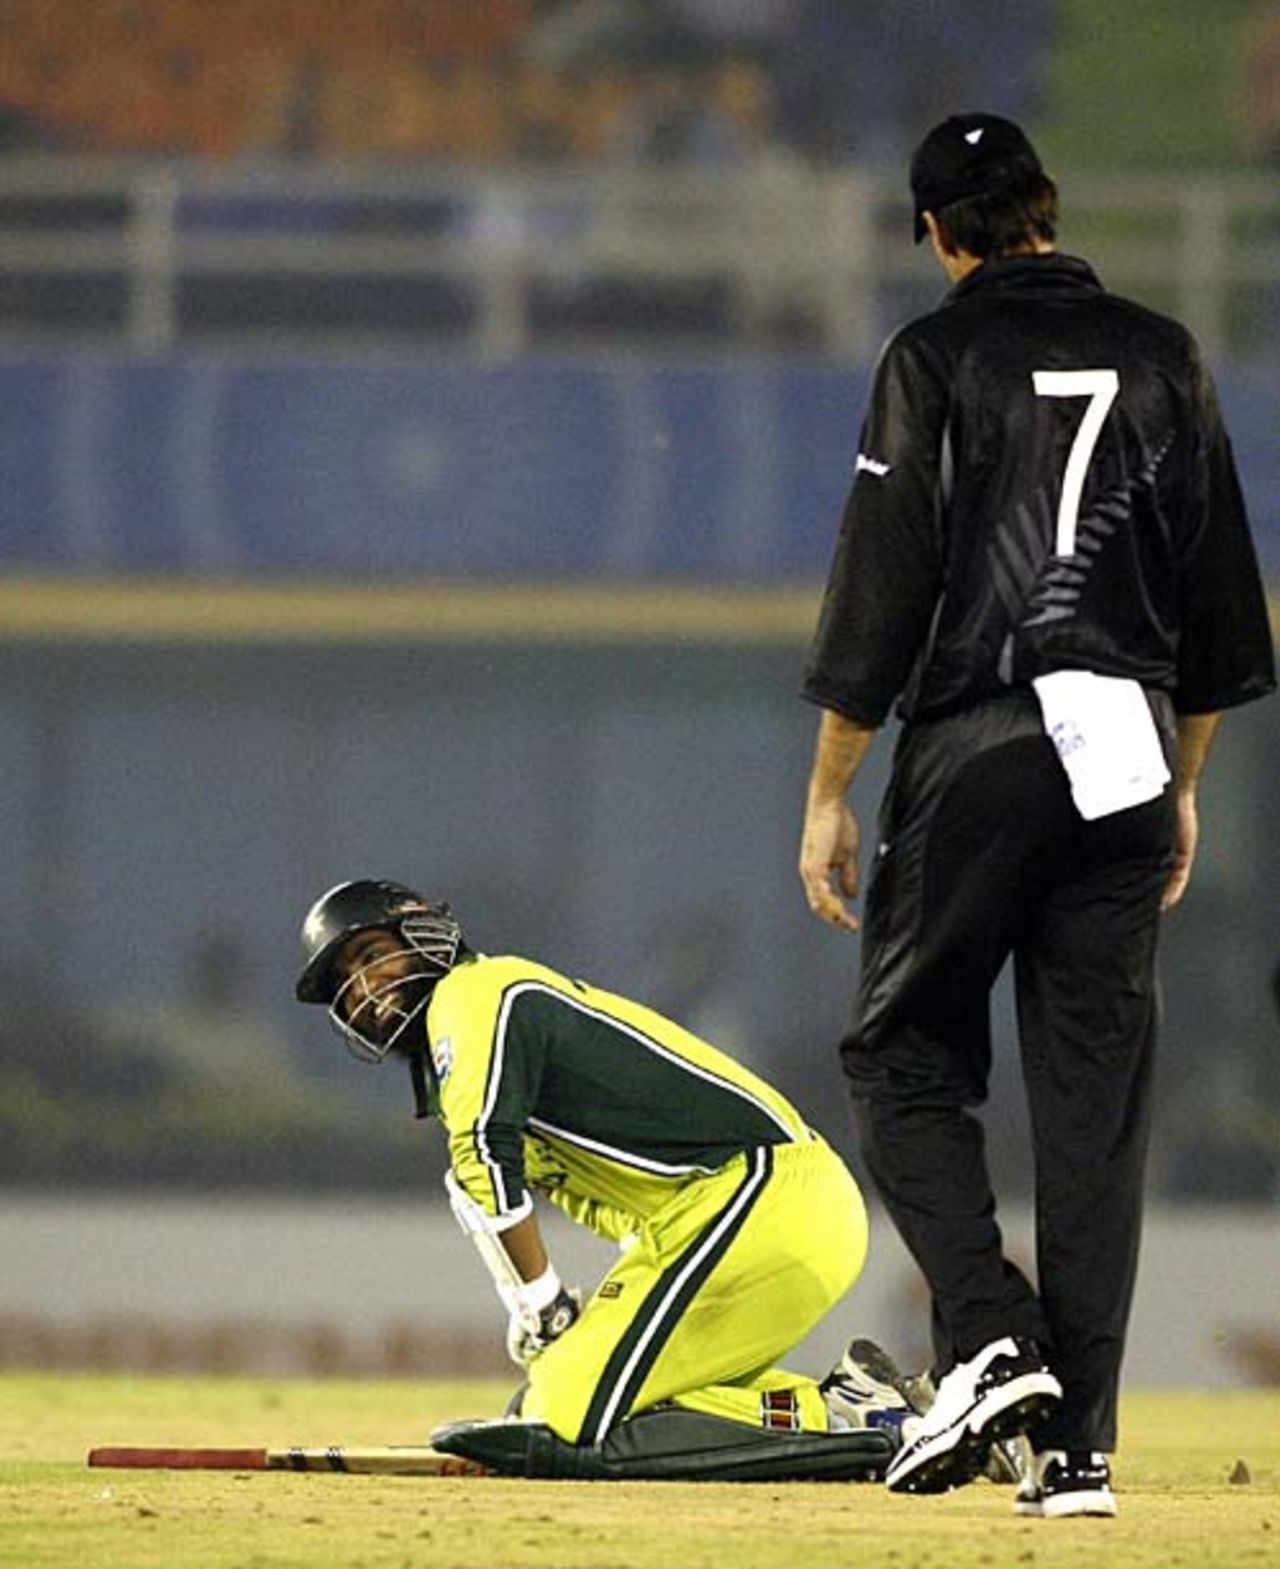 Cor, that's gotta hurt: Mohammad Yousuf manages to smile after being hit between the knee-rolls, New Zealand v Pakistan, 8th match, Mohali, Champions Trophy, October 25, 2006